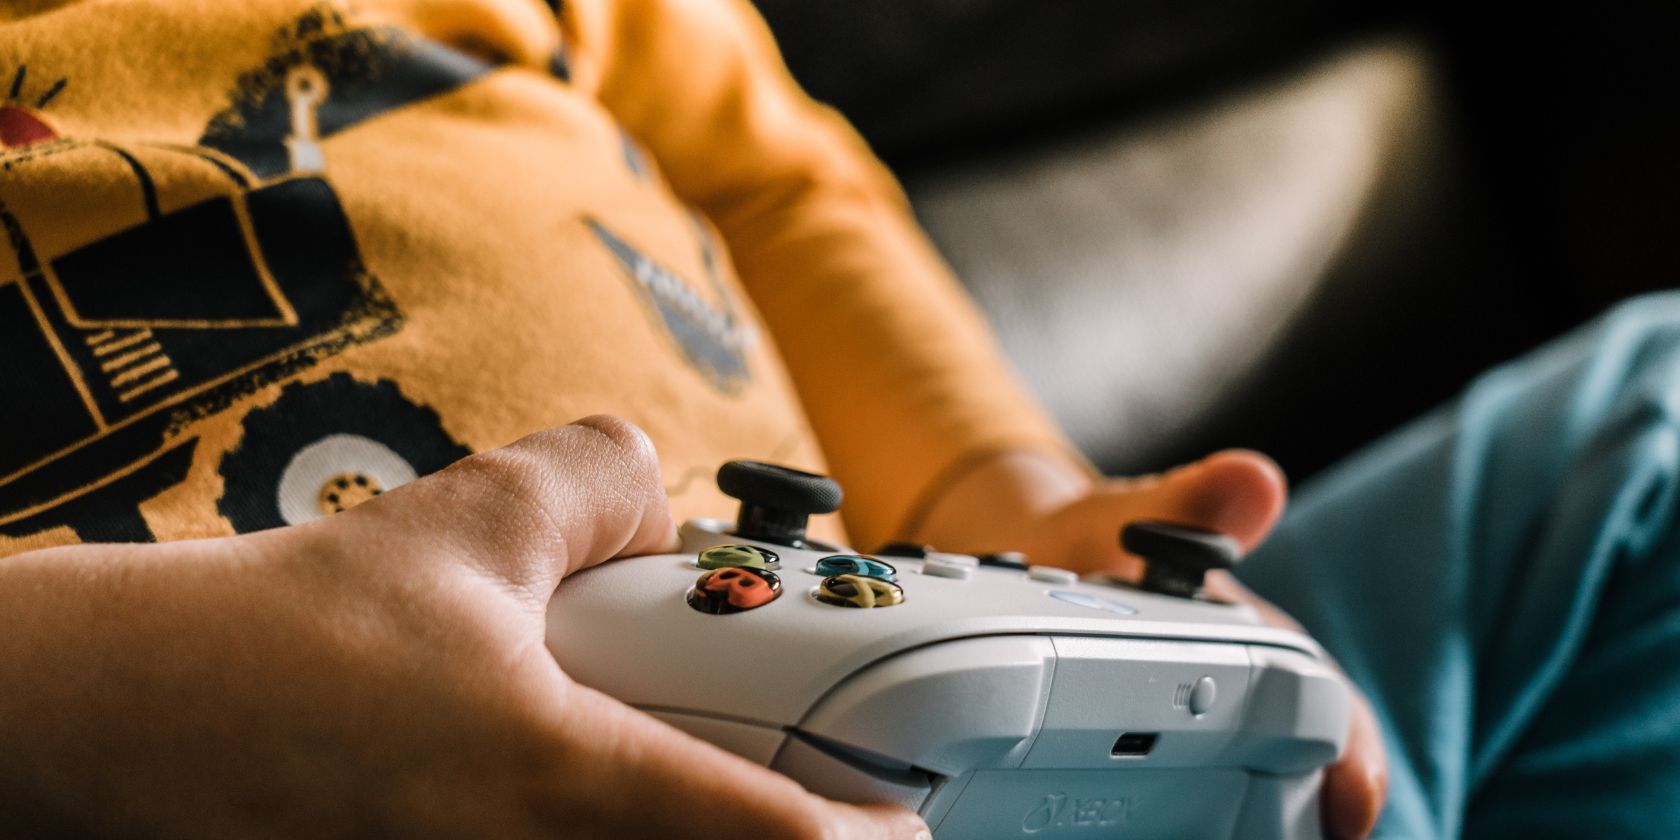 A close up of a child playing Xbox with the controller in their hands assisted by their parent